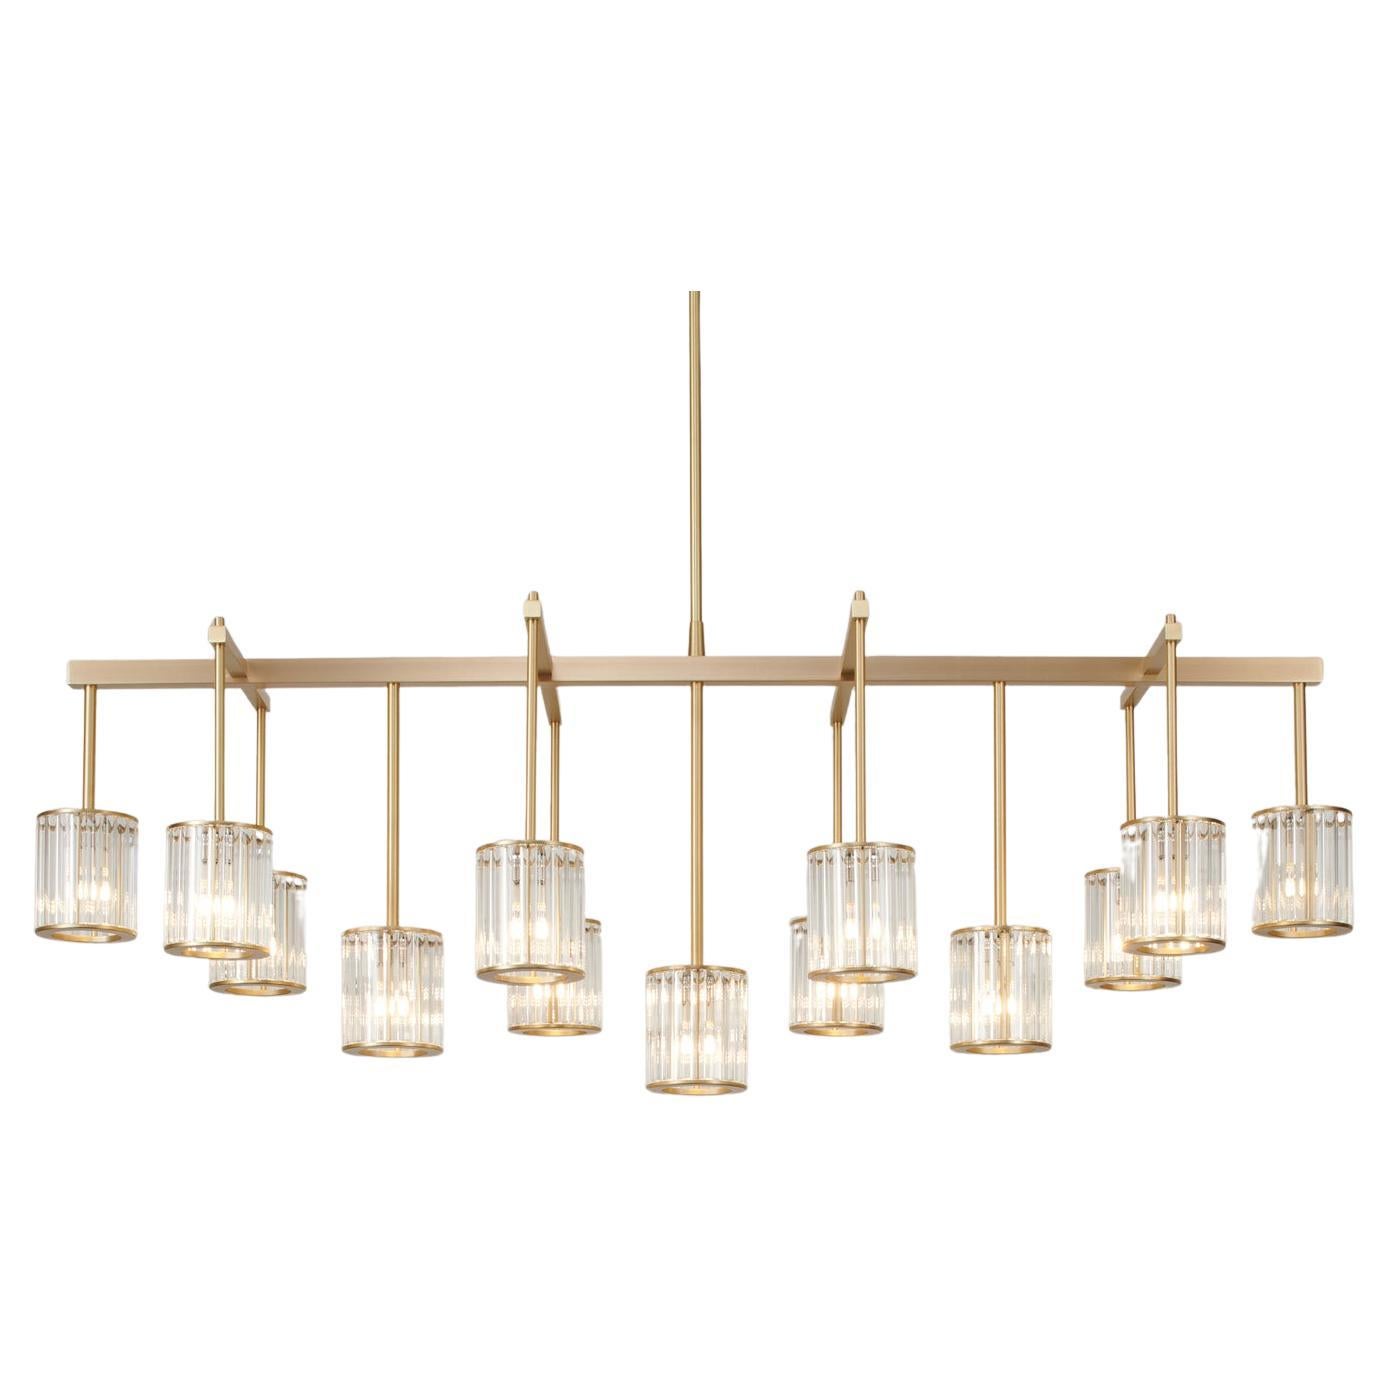 Flute Beam Chandelier with 13 Arms in Brushed Brass and Clear Glass Diffusers